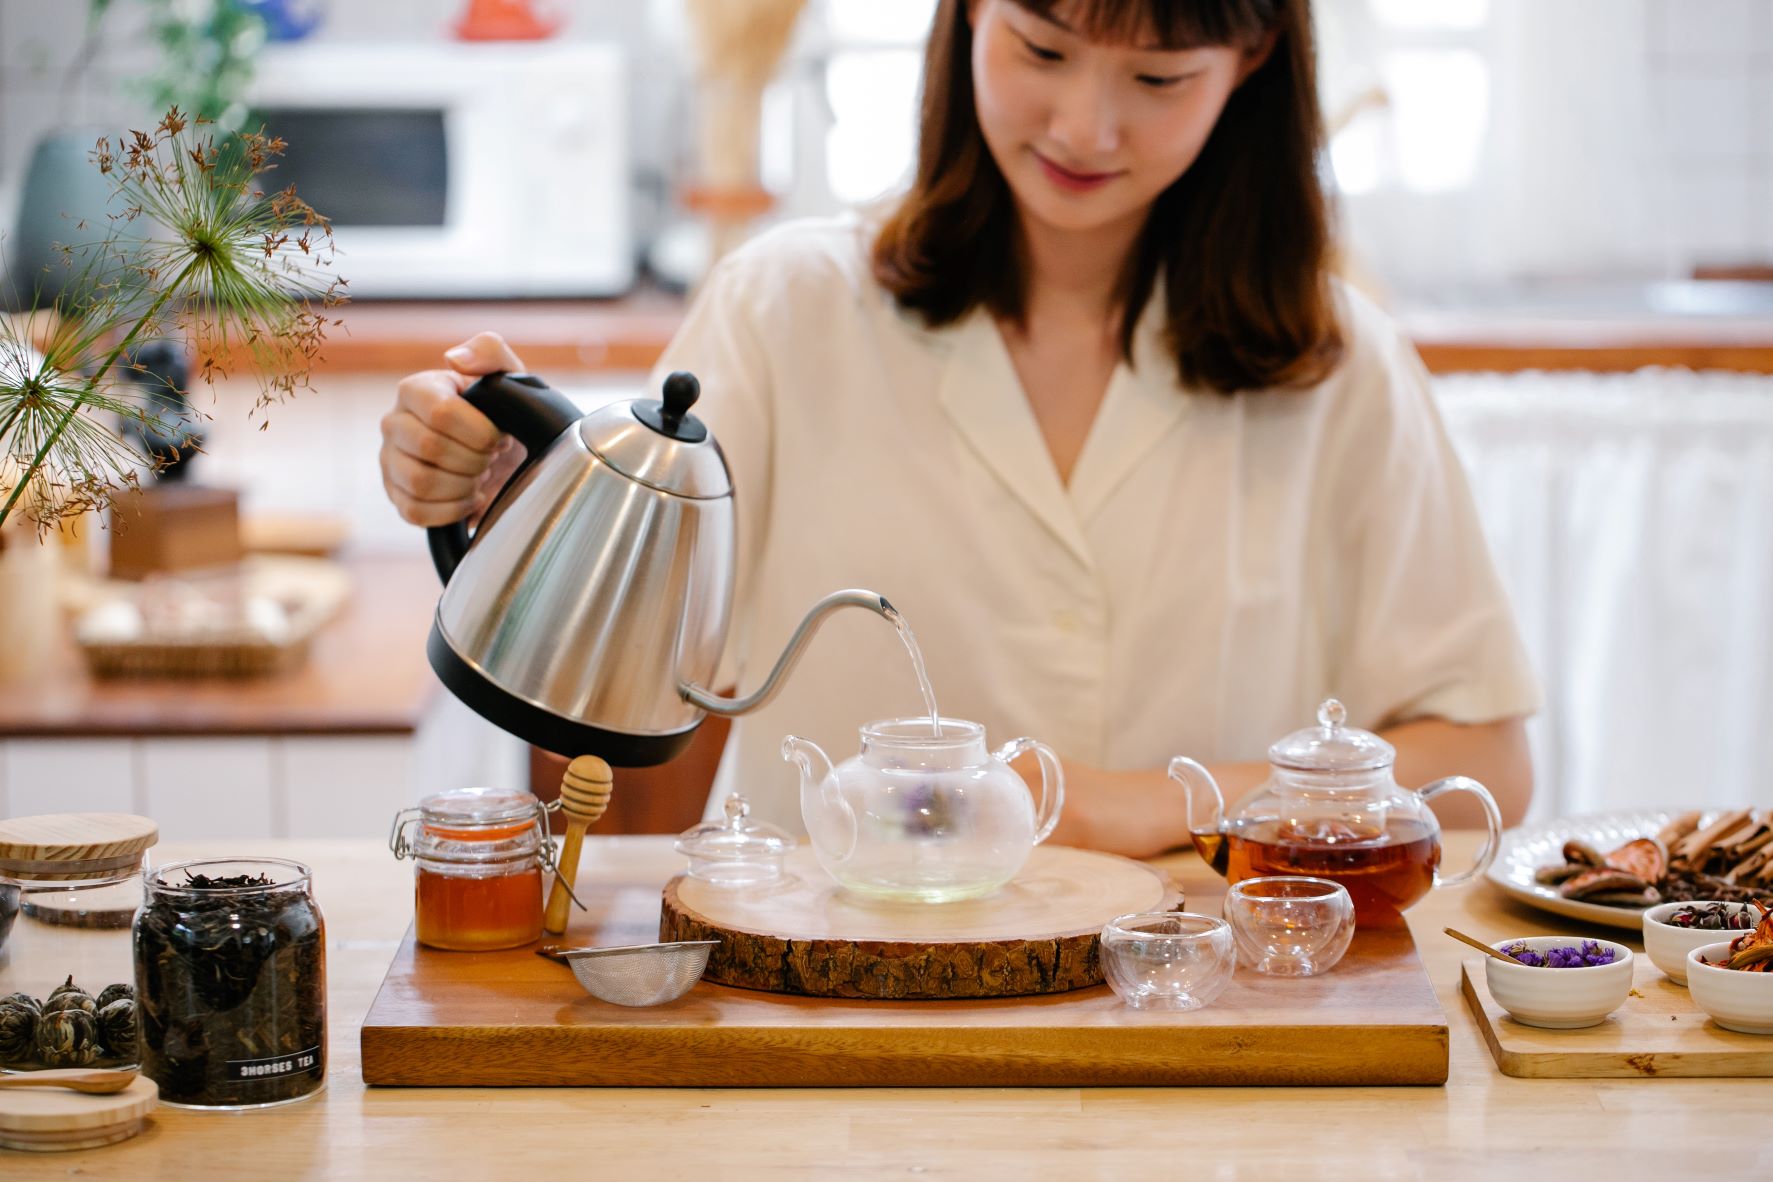 How To Make Tea With An Electric Kettle